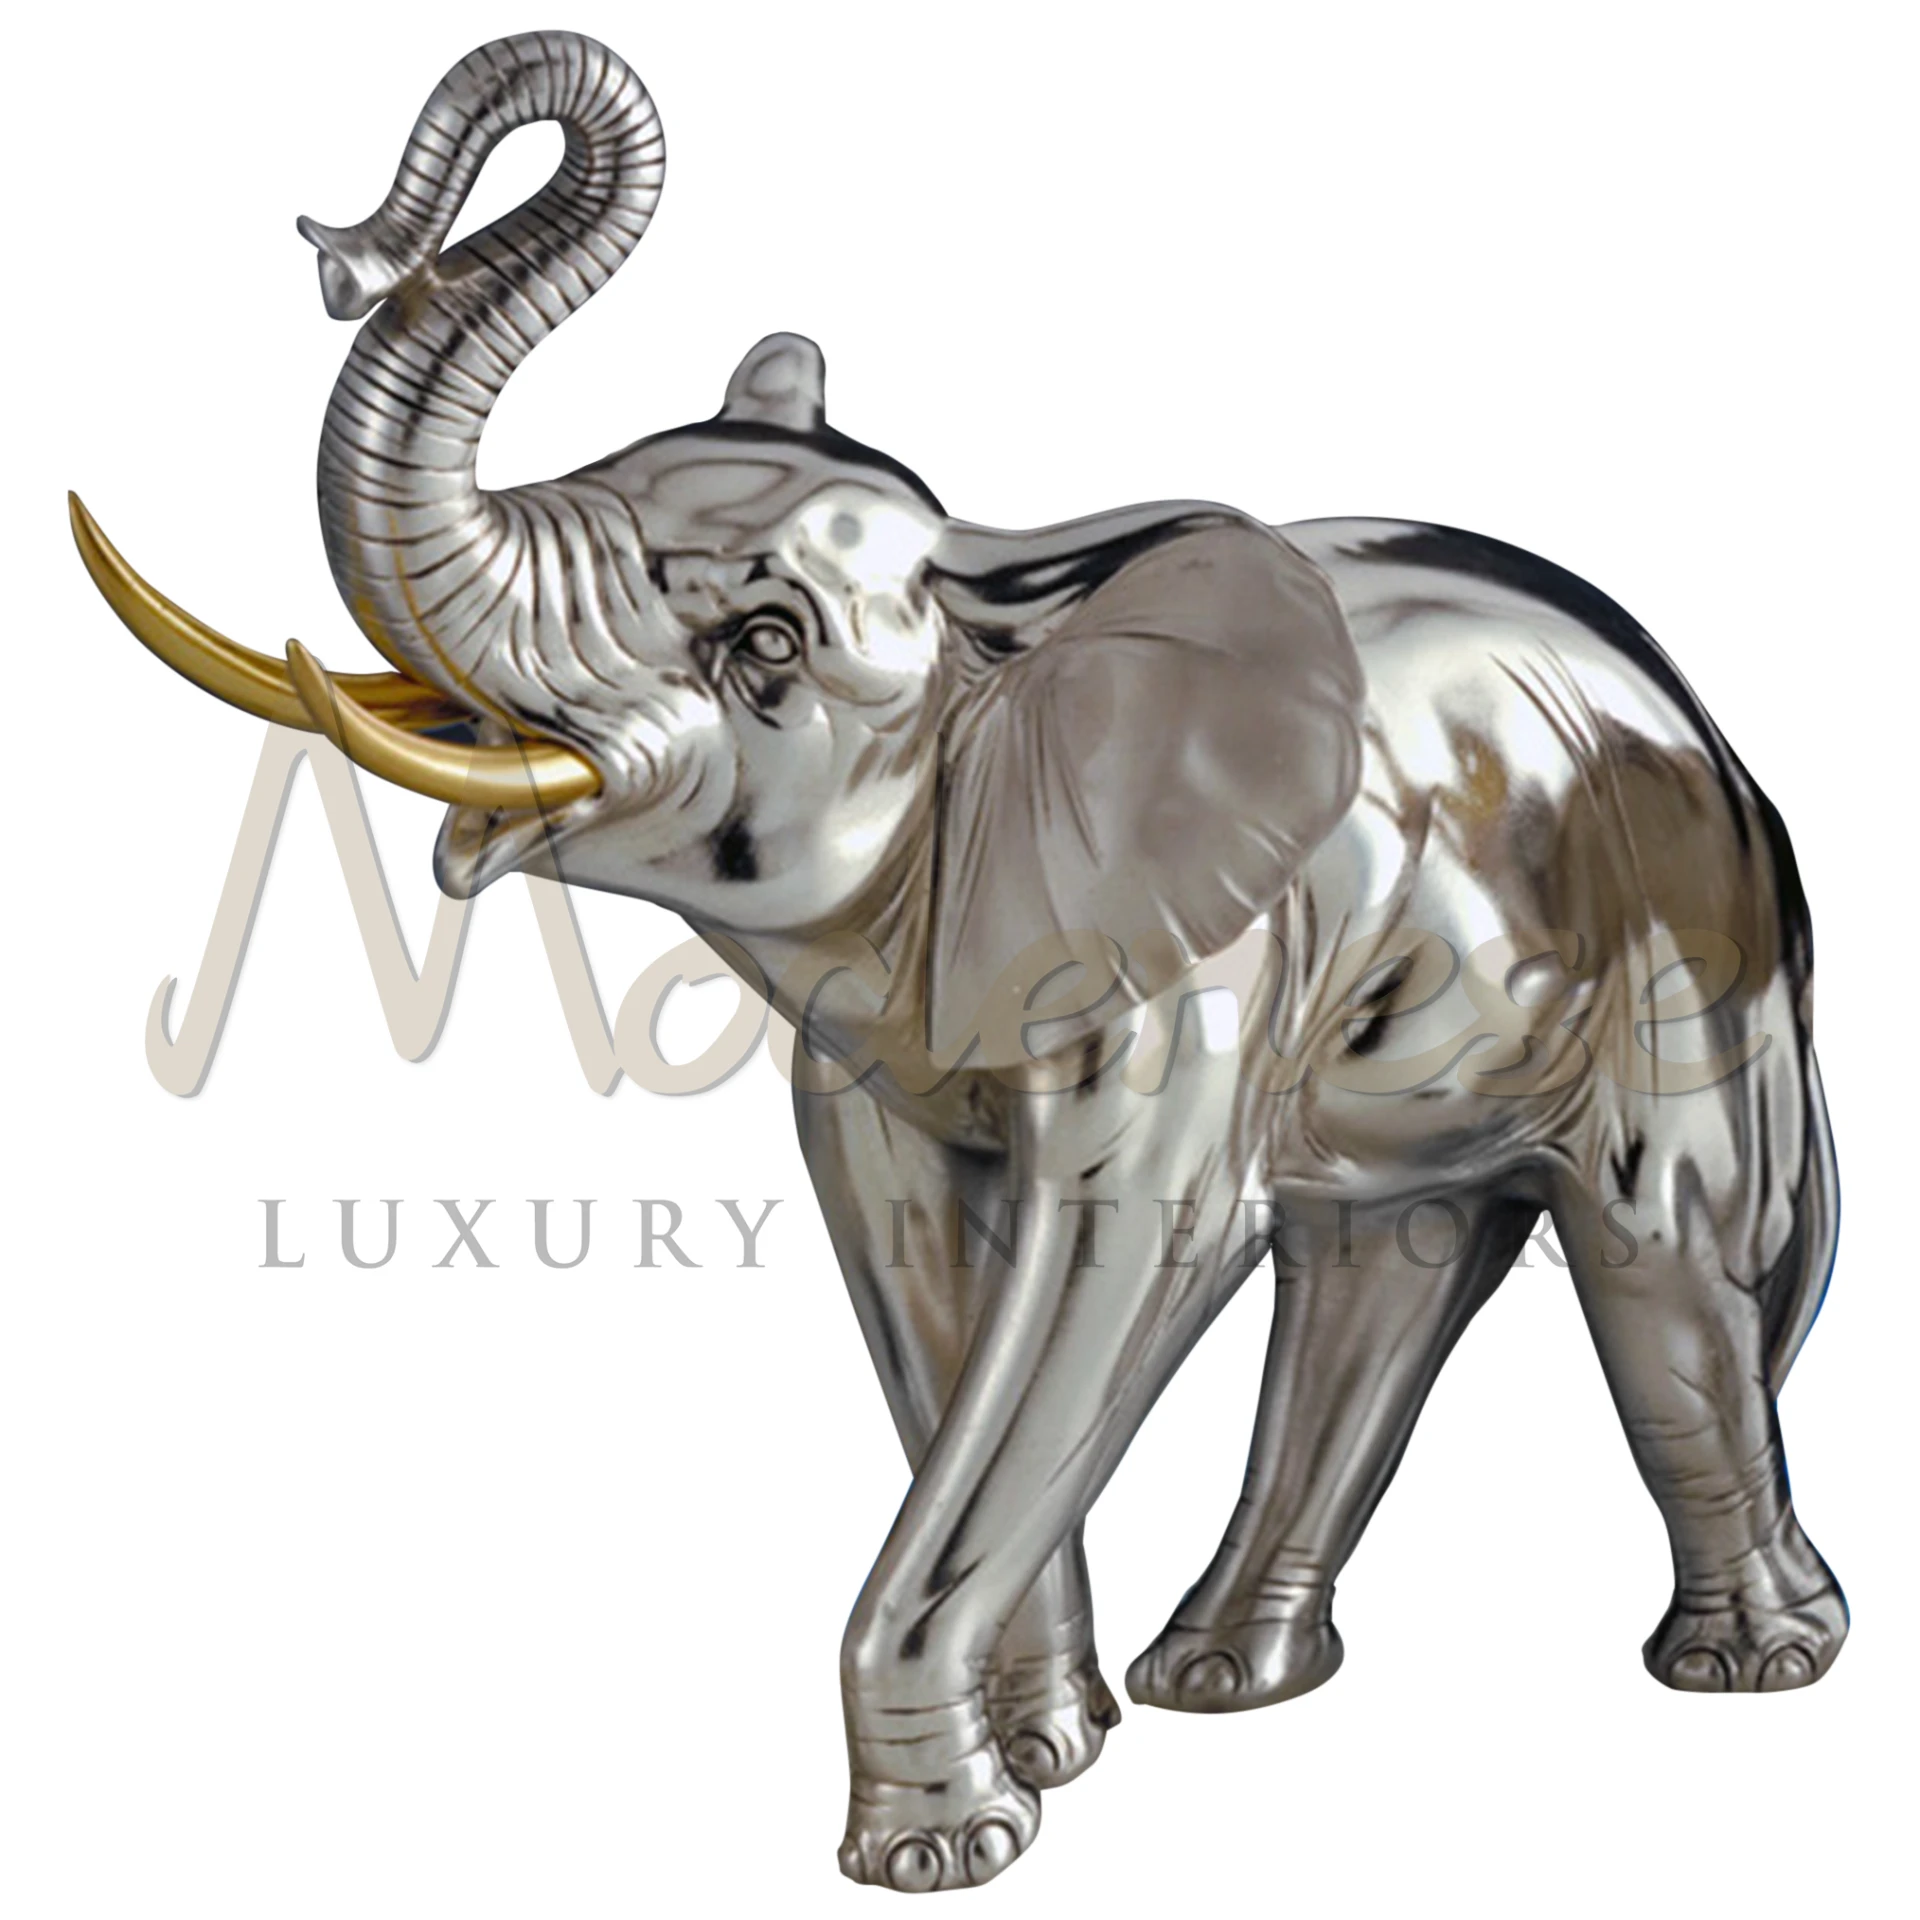 Silver Elephant Set with statues and decorative items, showcasing intricate elephant motifs in high-quality silver, perfect for luxury home décor.